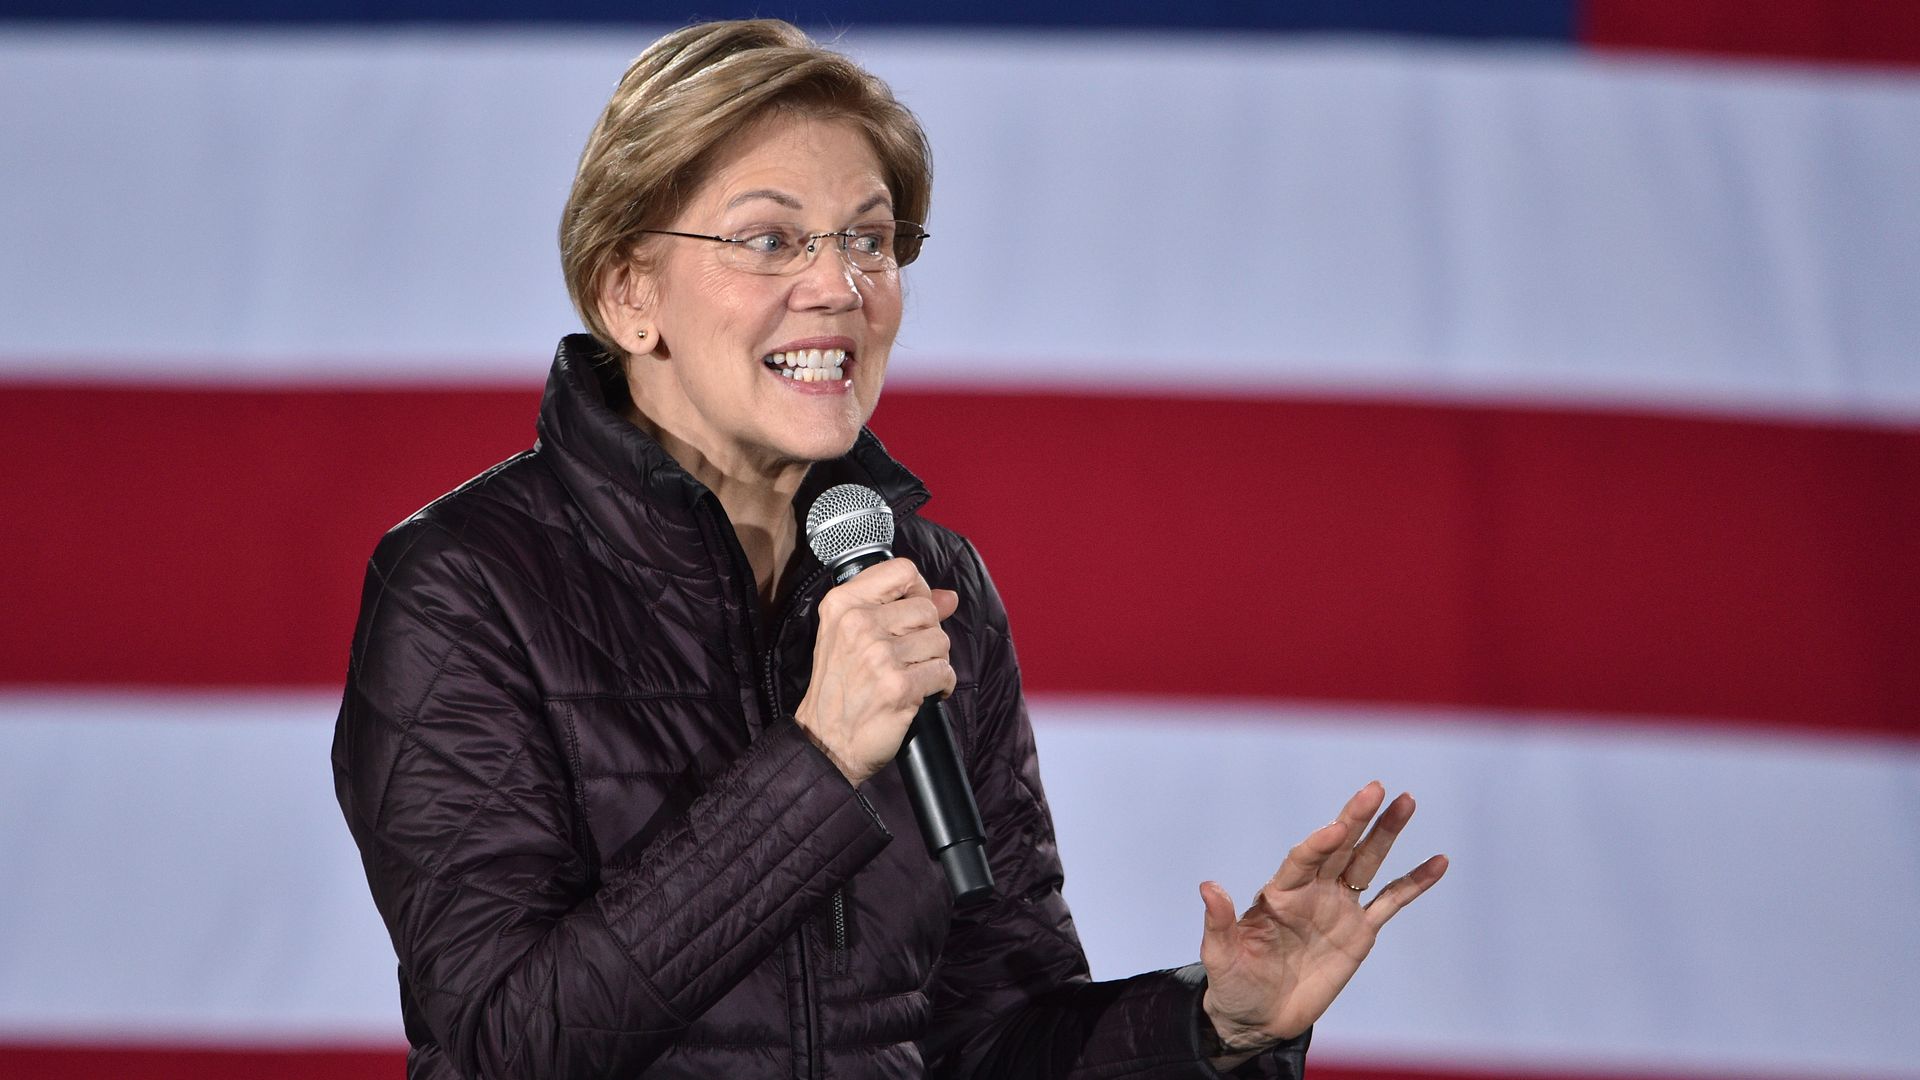 In this image, Elizabeth Warren holds a microphone and speaks